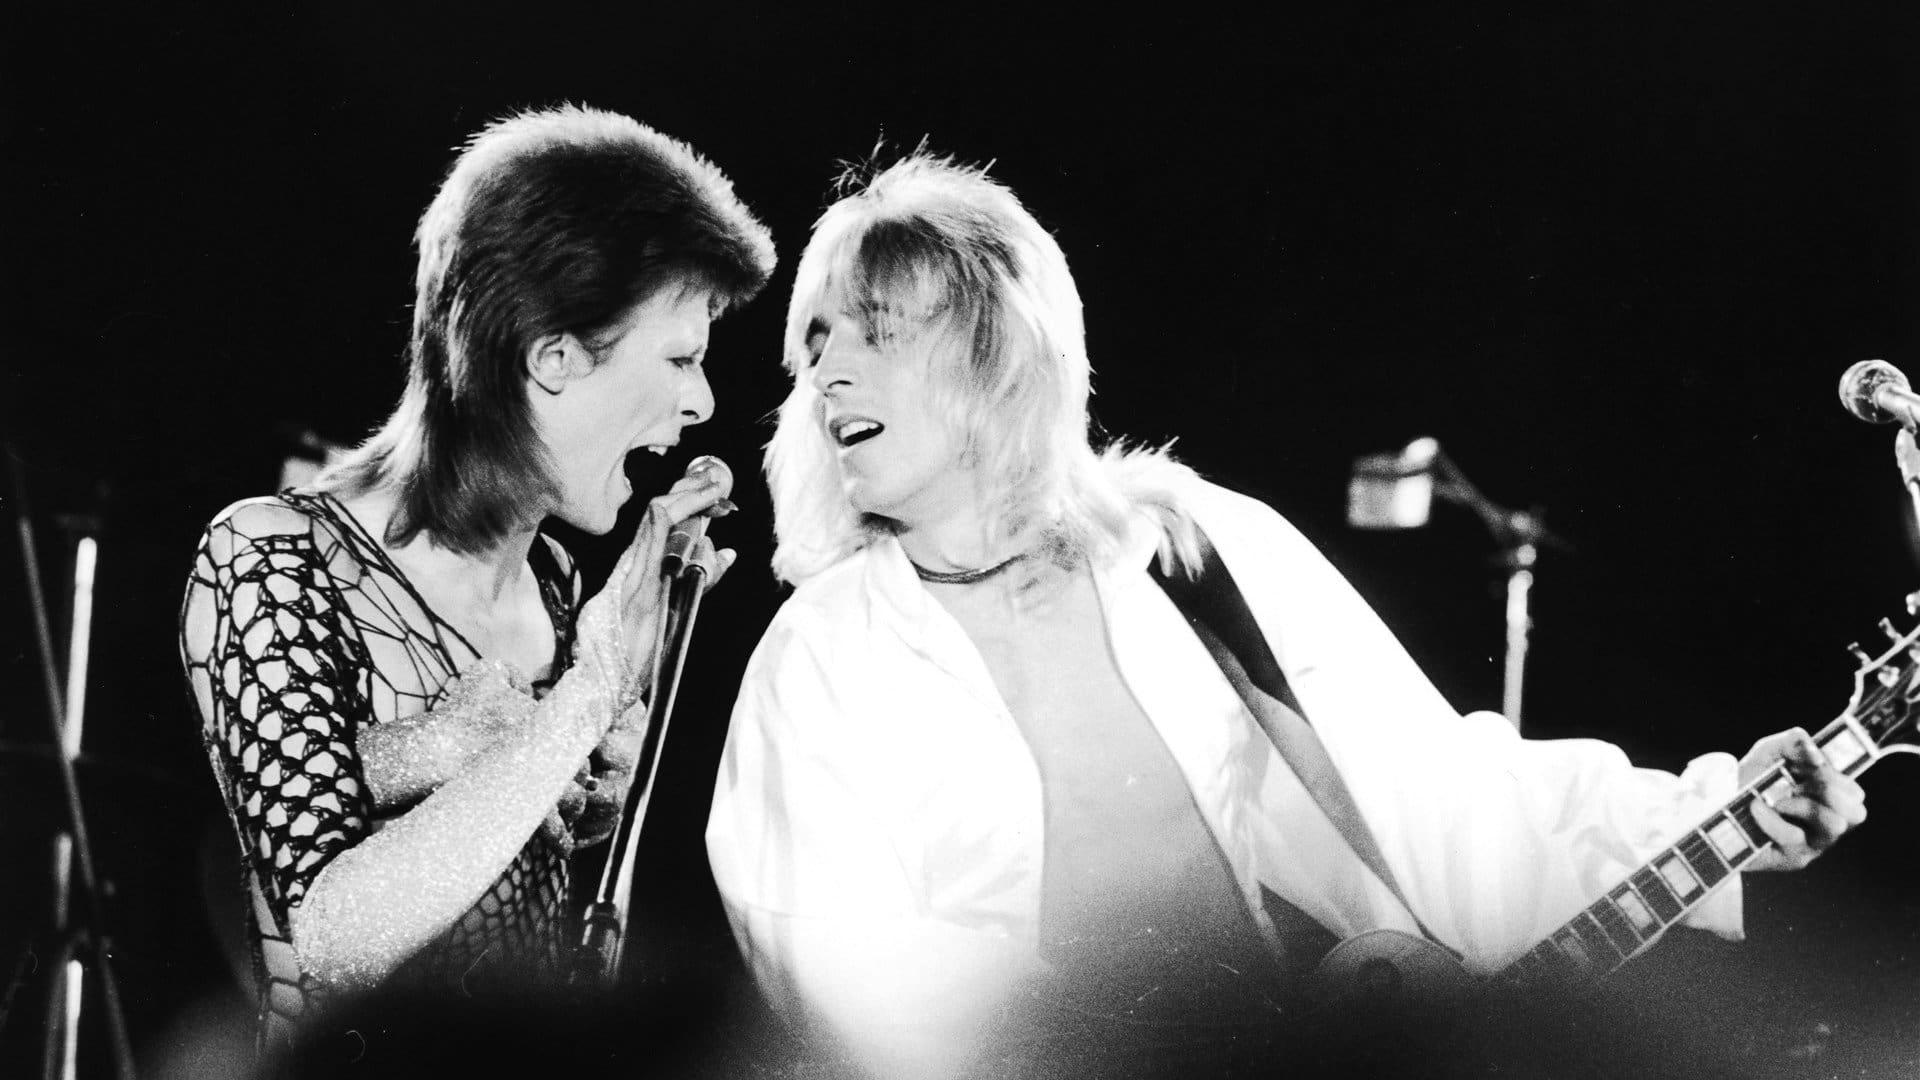 Beside Bowie: The Mick Ronson Story backdrop